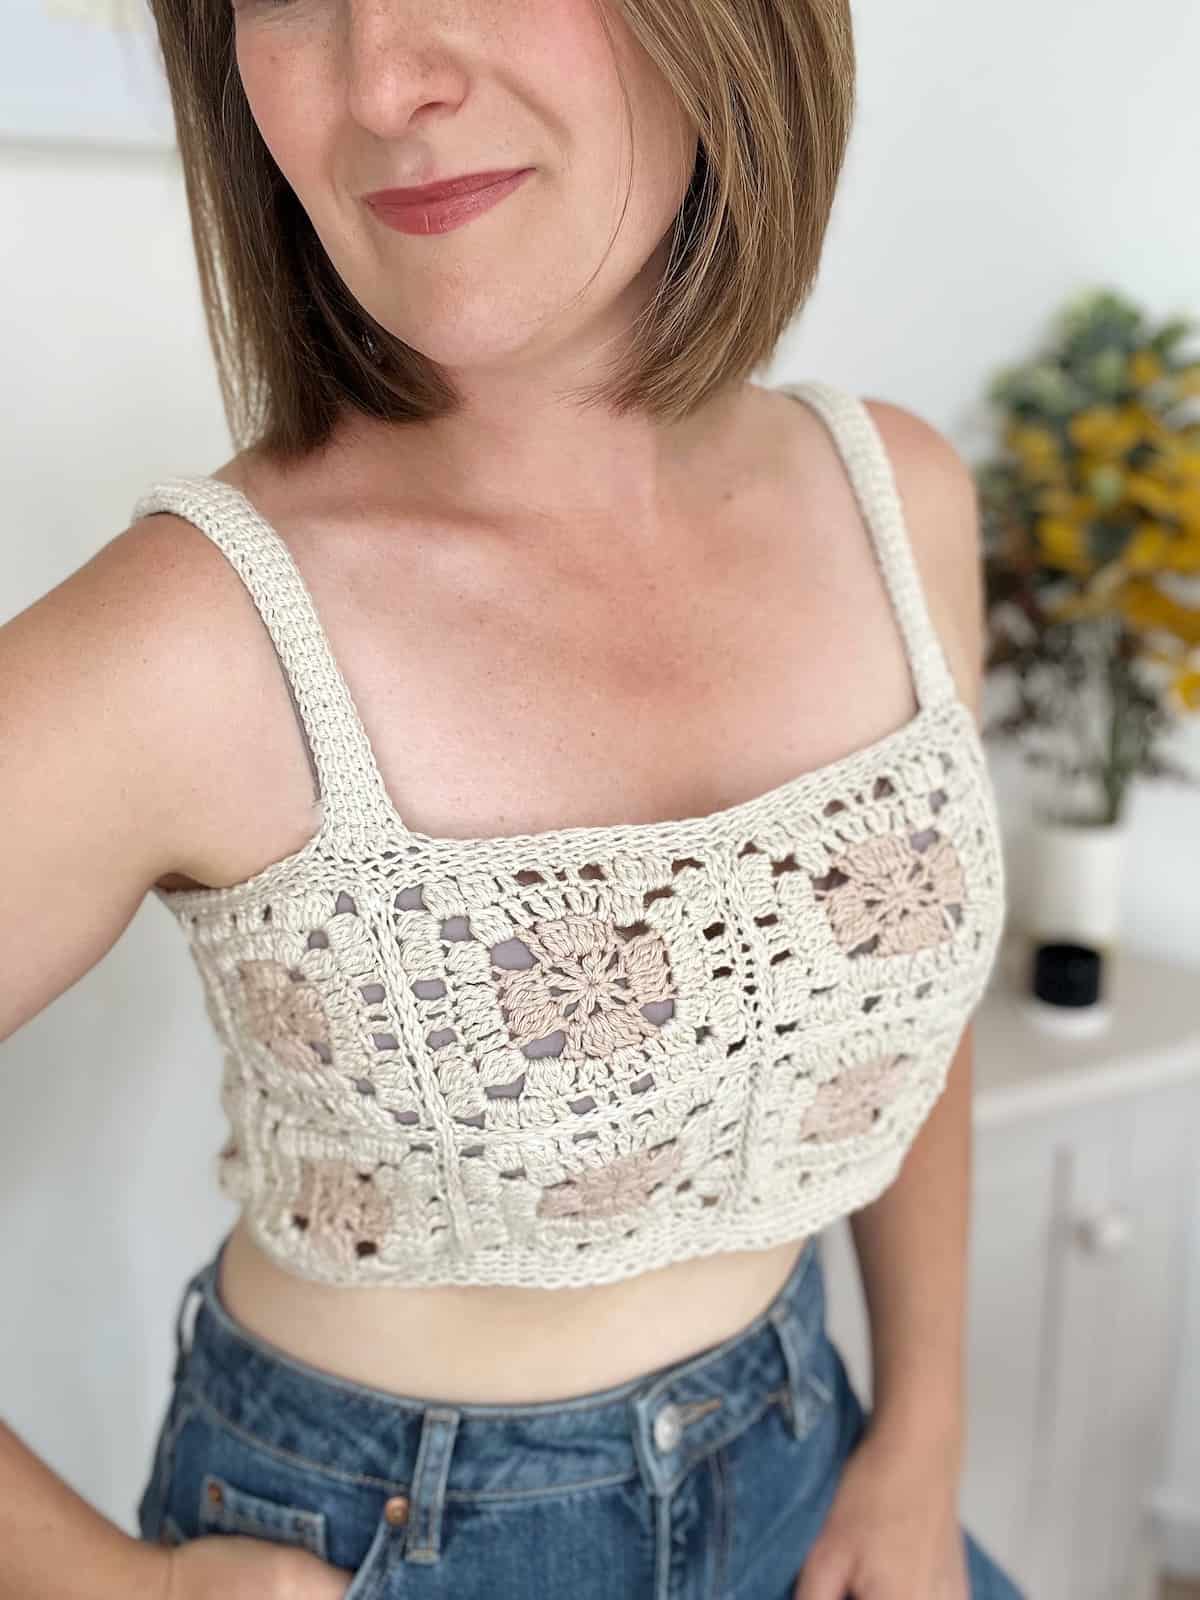 Woman wearing short crochet top made from granny squares.